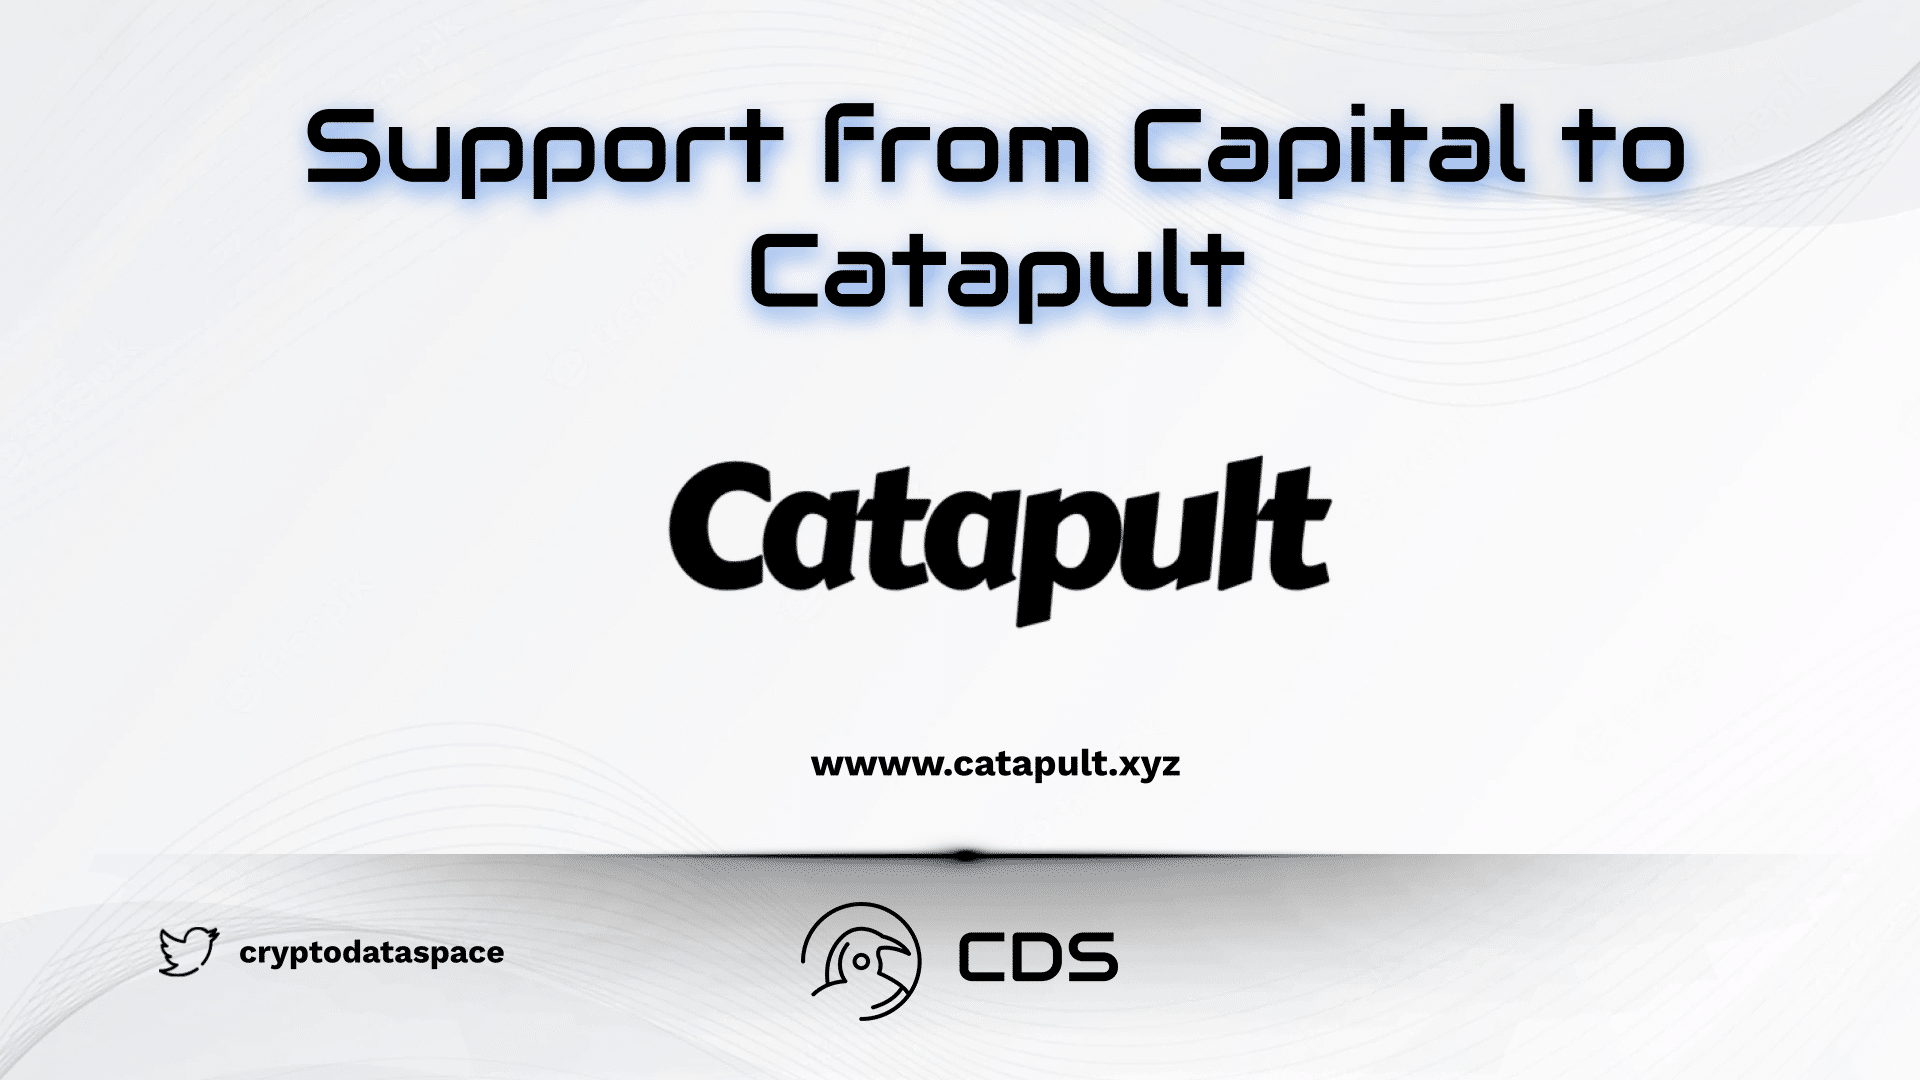 Support from Capital to Catapult